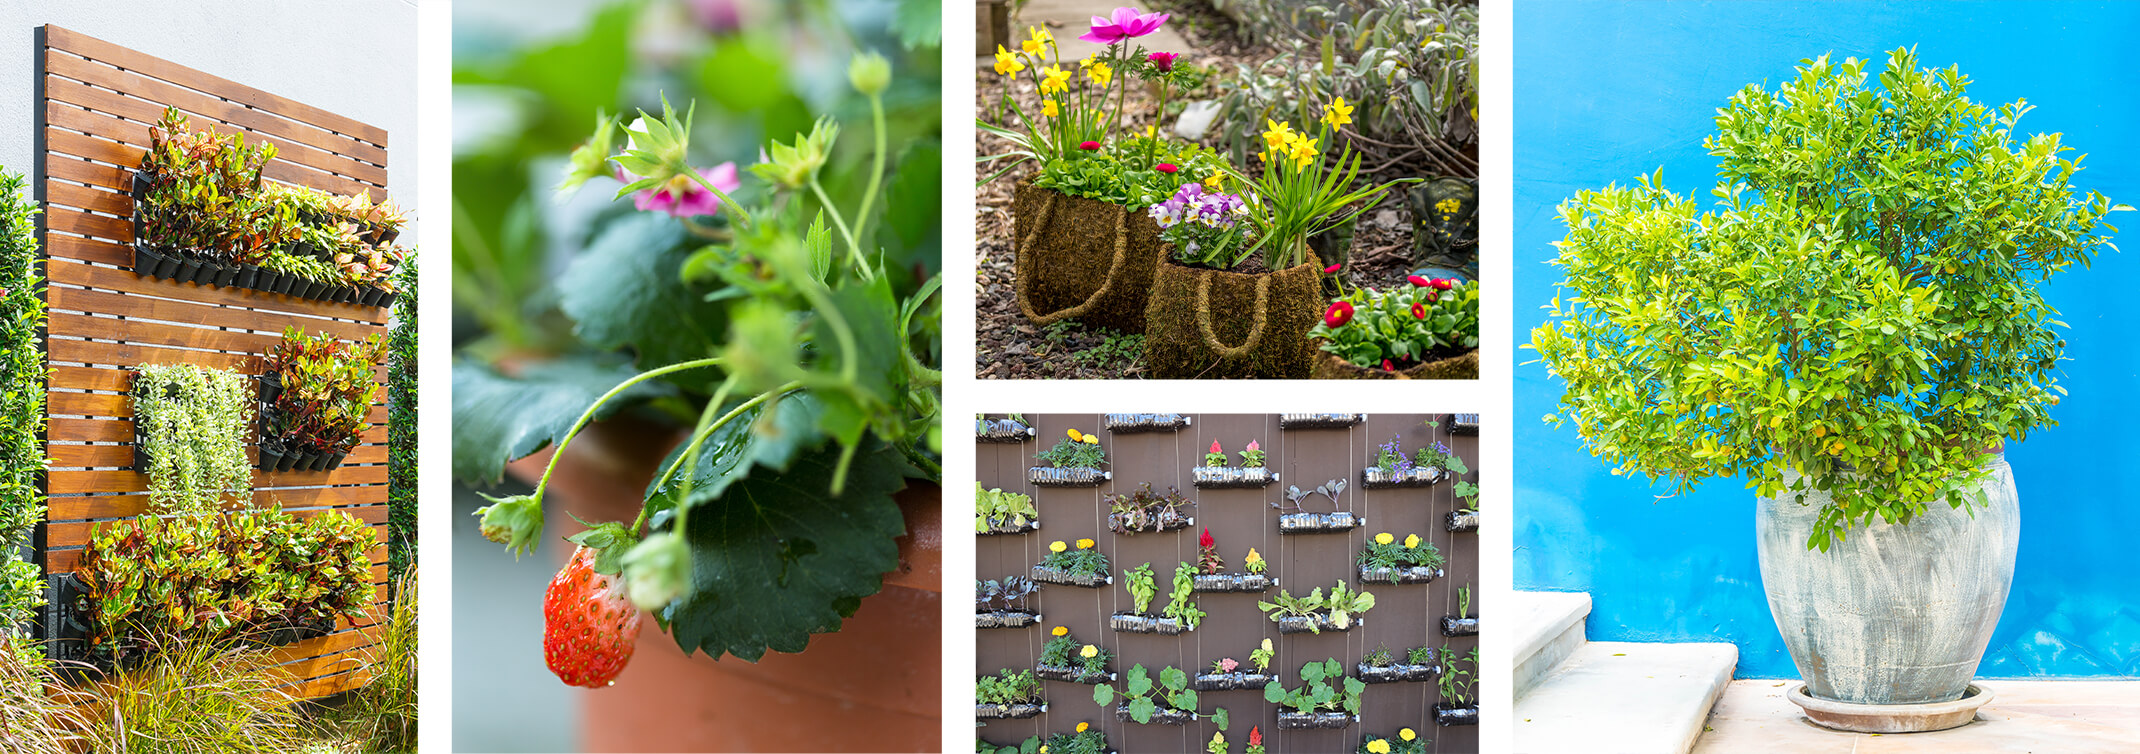 5 images: a vertical wooden wall outside with a variety of plants growing in planters on it, near an ornamental grass; a closeup of a strawberry plant in a terracotta pot; moss 